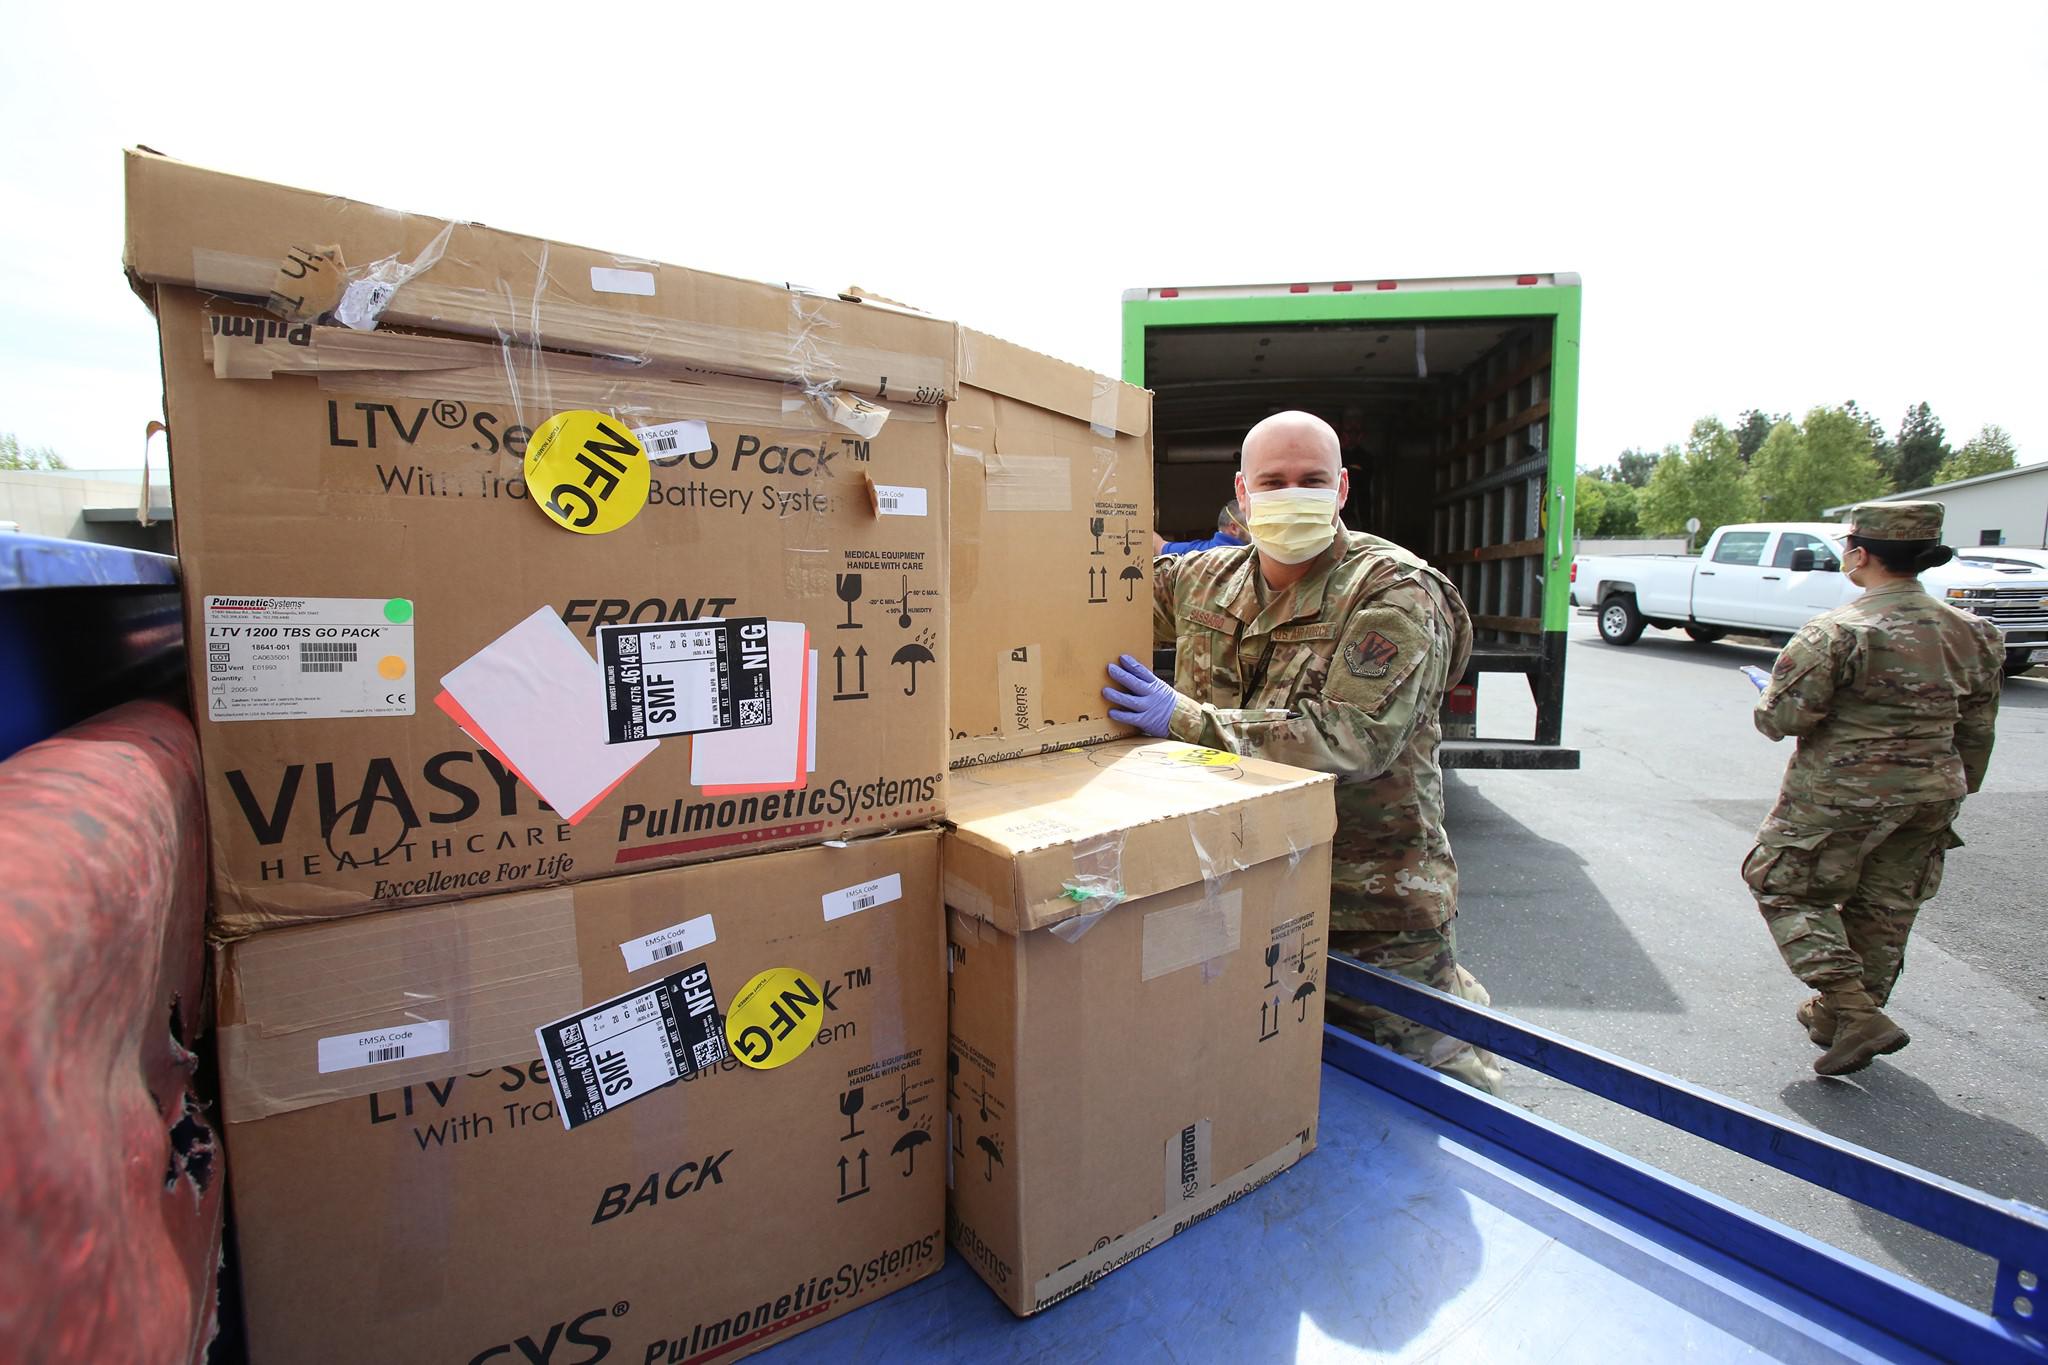 Working with the DGS and Military to disinfect medical supplies during COVID